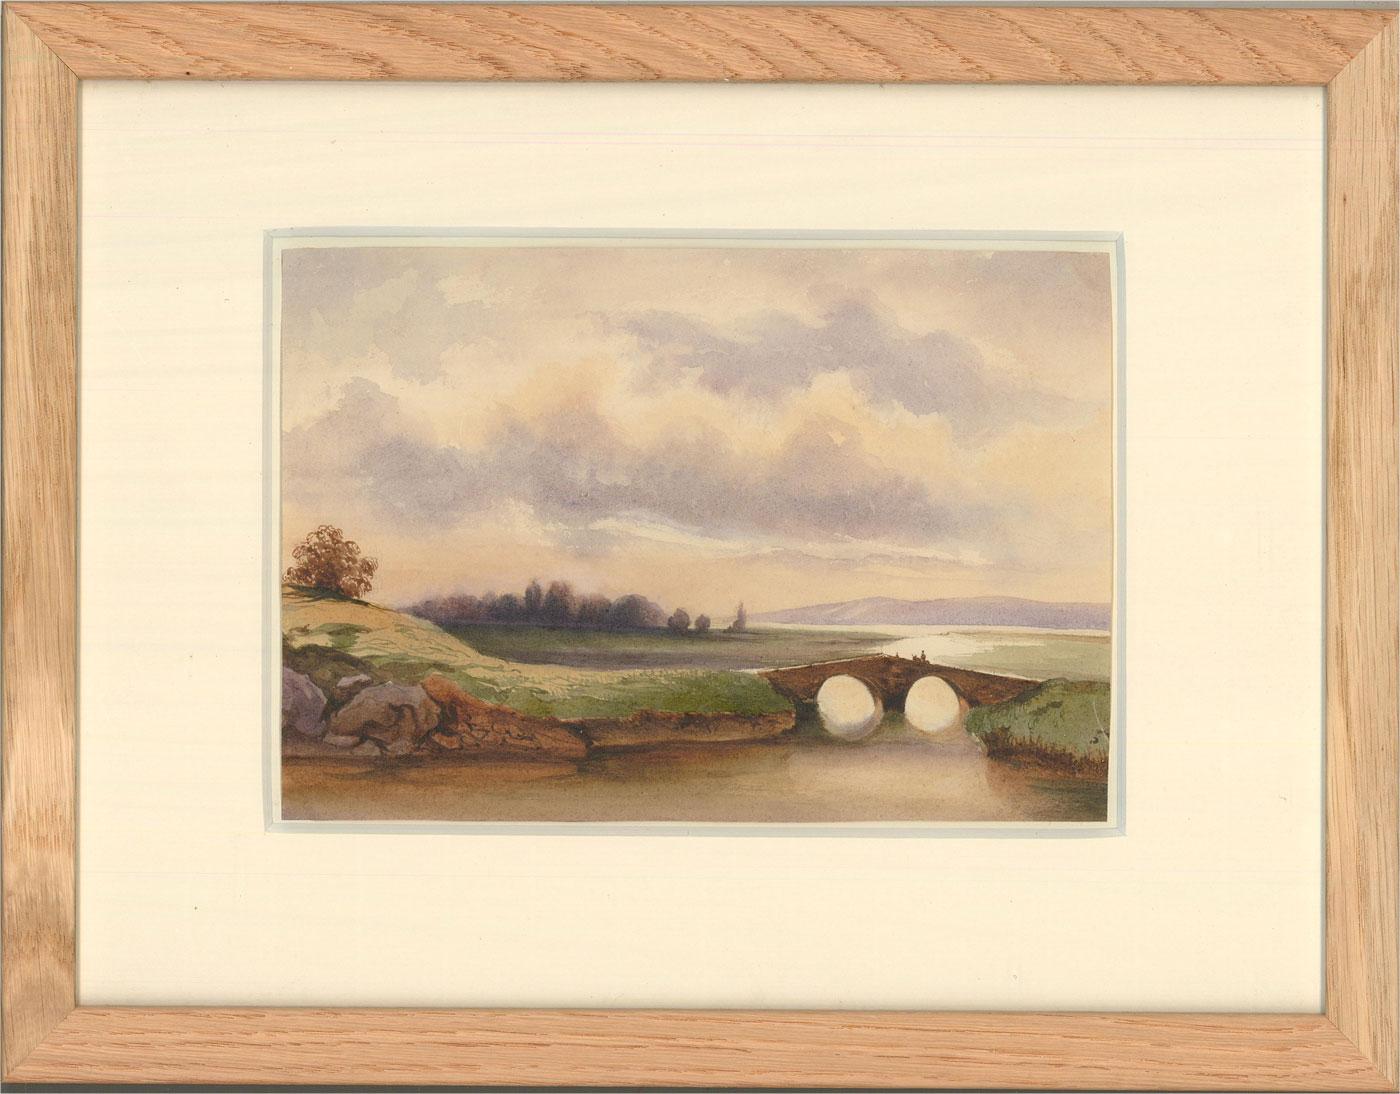 Unknown Landscape Art - Late 19th Century Watercolour - After The Rain